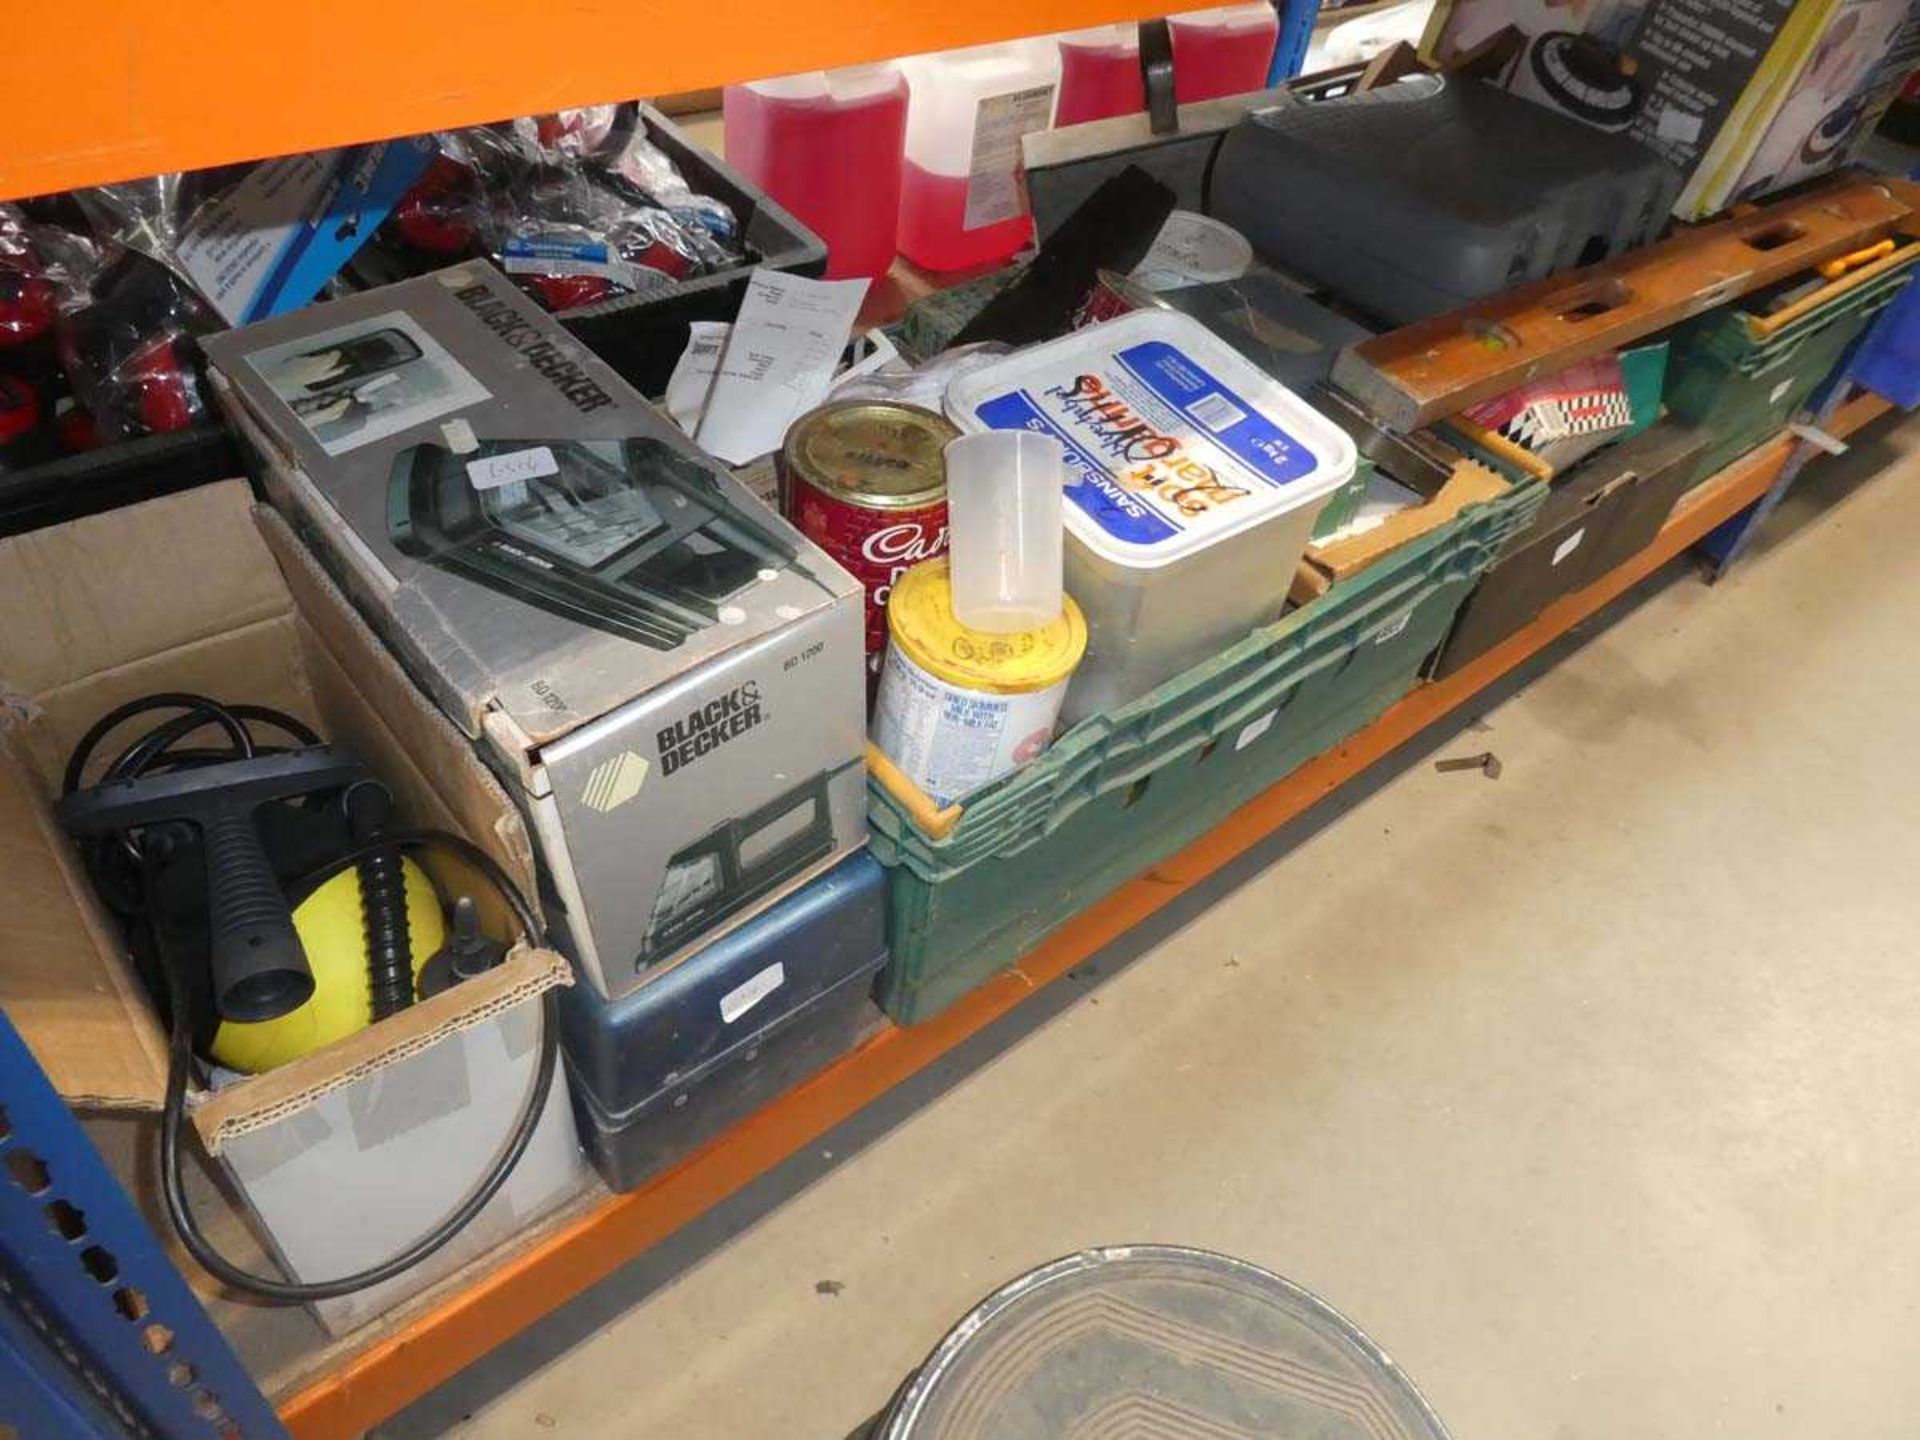 Large under bay containing wallpaper stripper, fixings, spirit level, saws, sanders, etc.